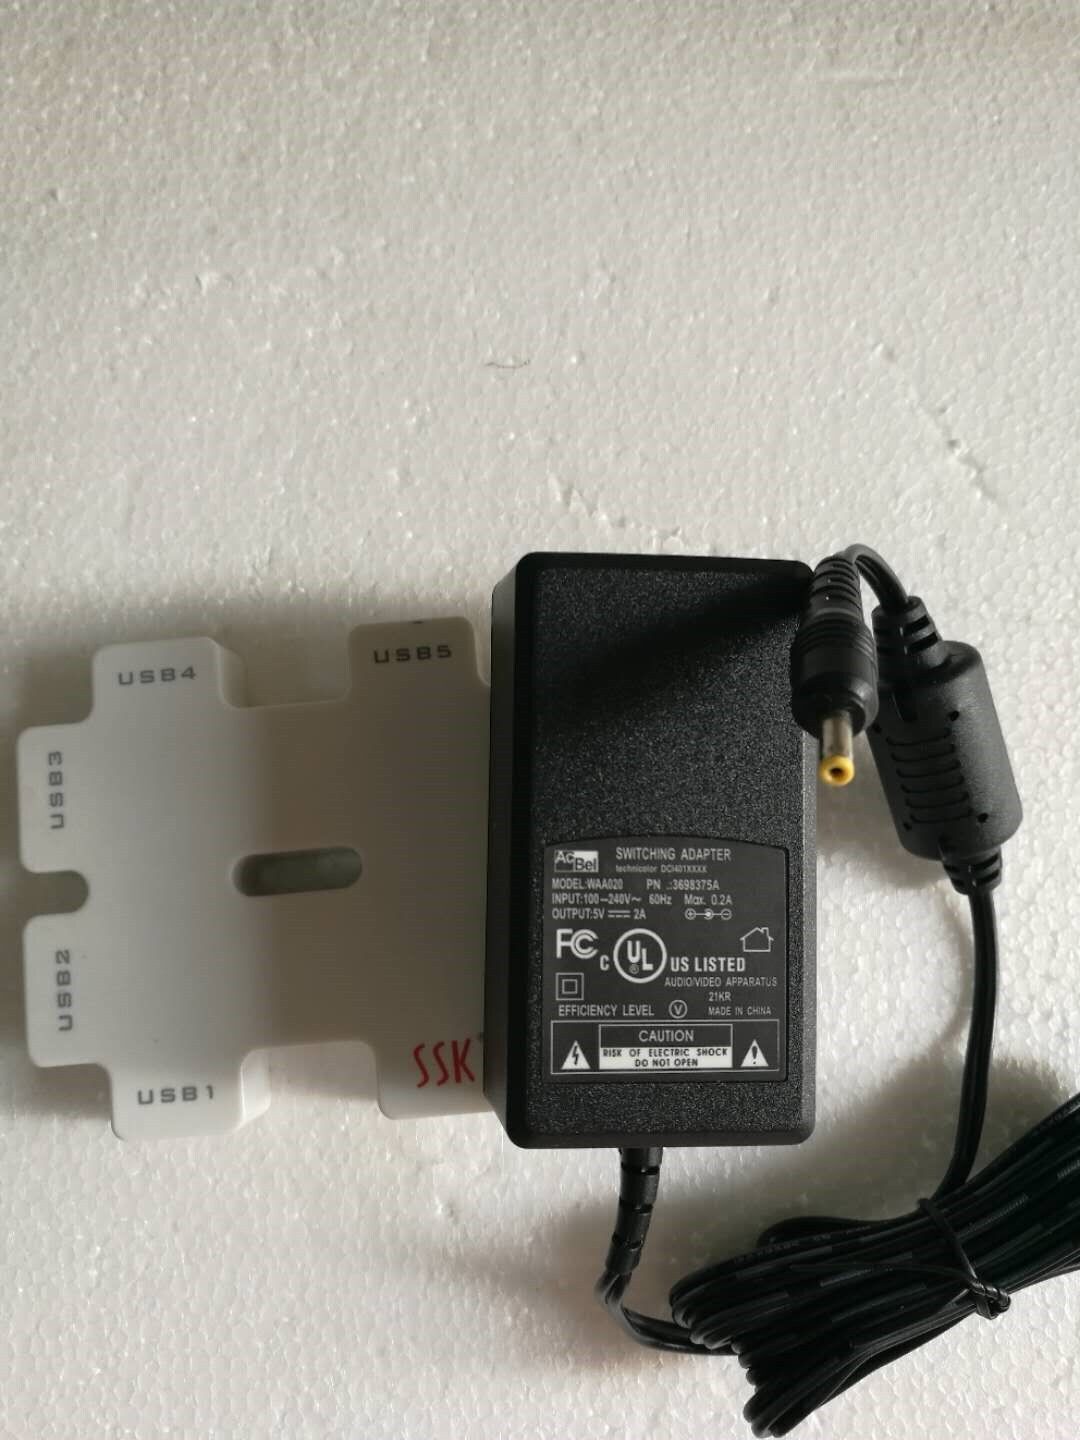 *Brand NEW*5V 2A AC Adapter Genuine AcBel WAA020 Power Supply 3.5*1.35mm